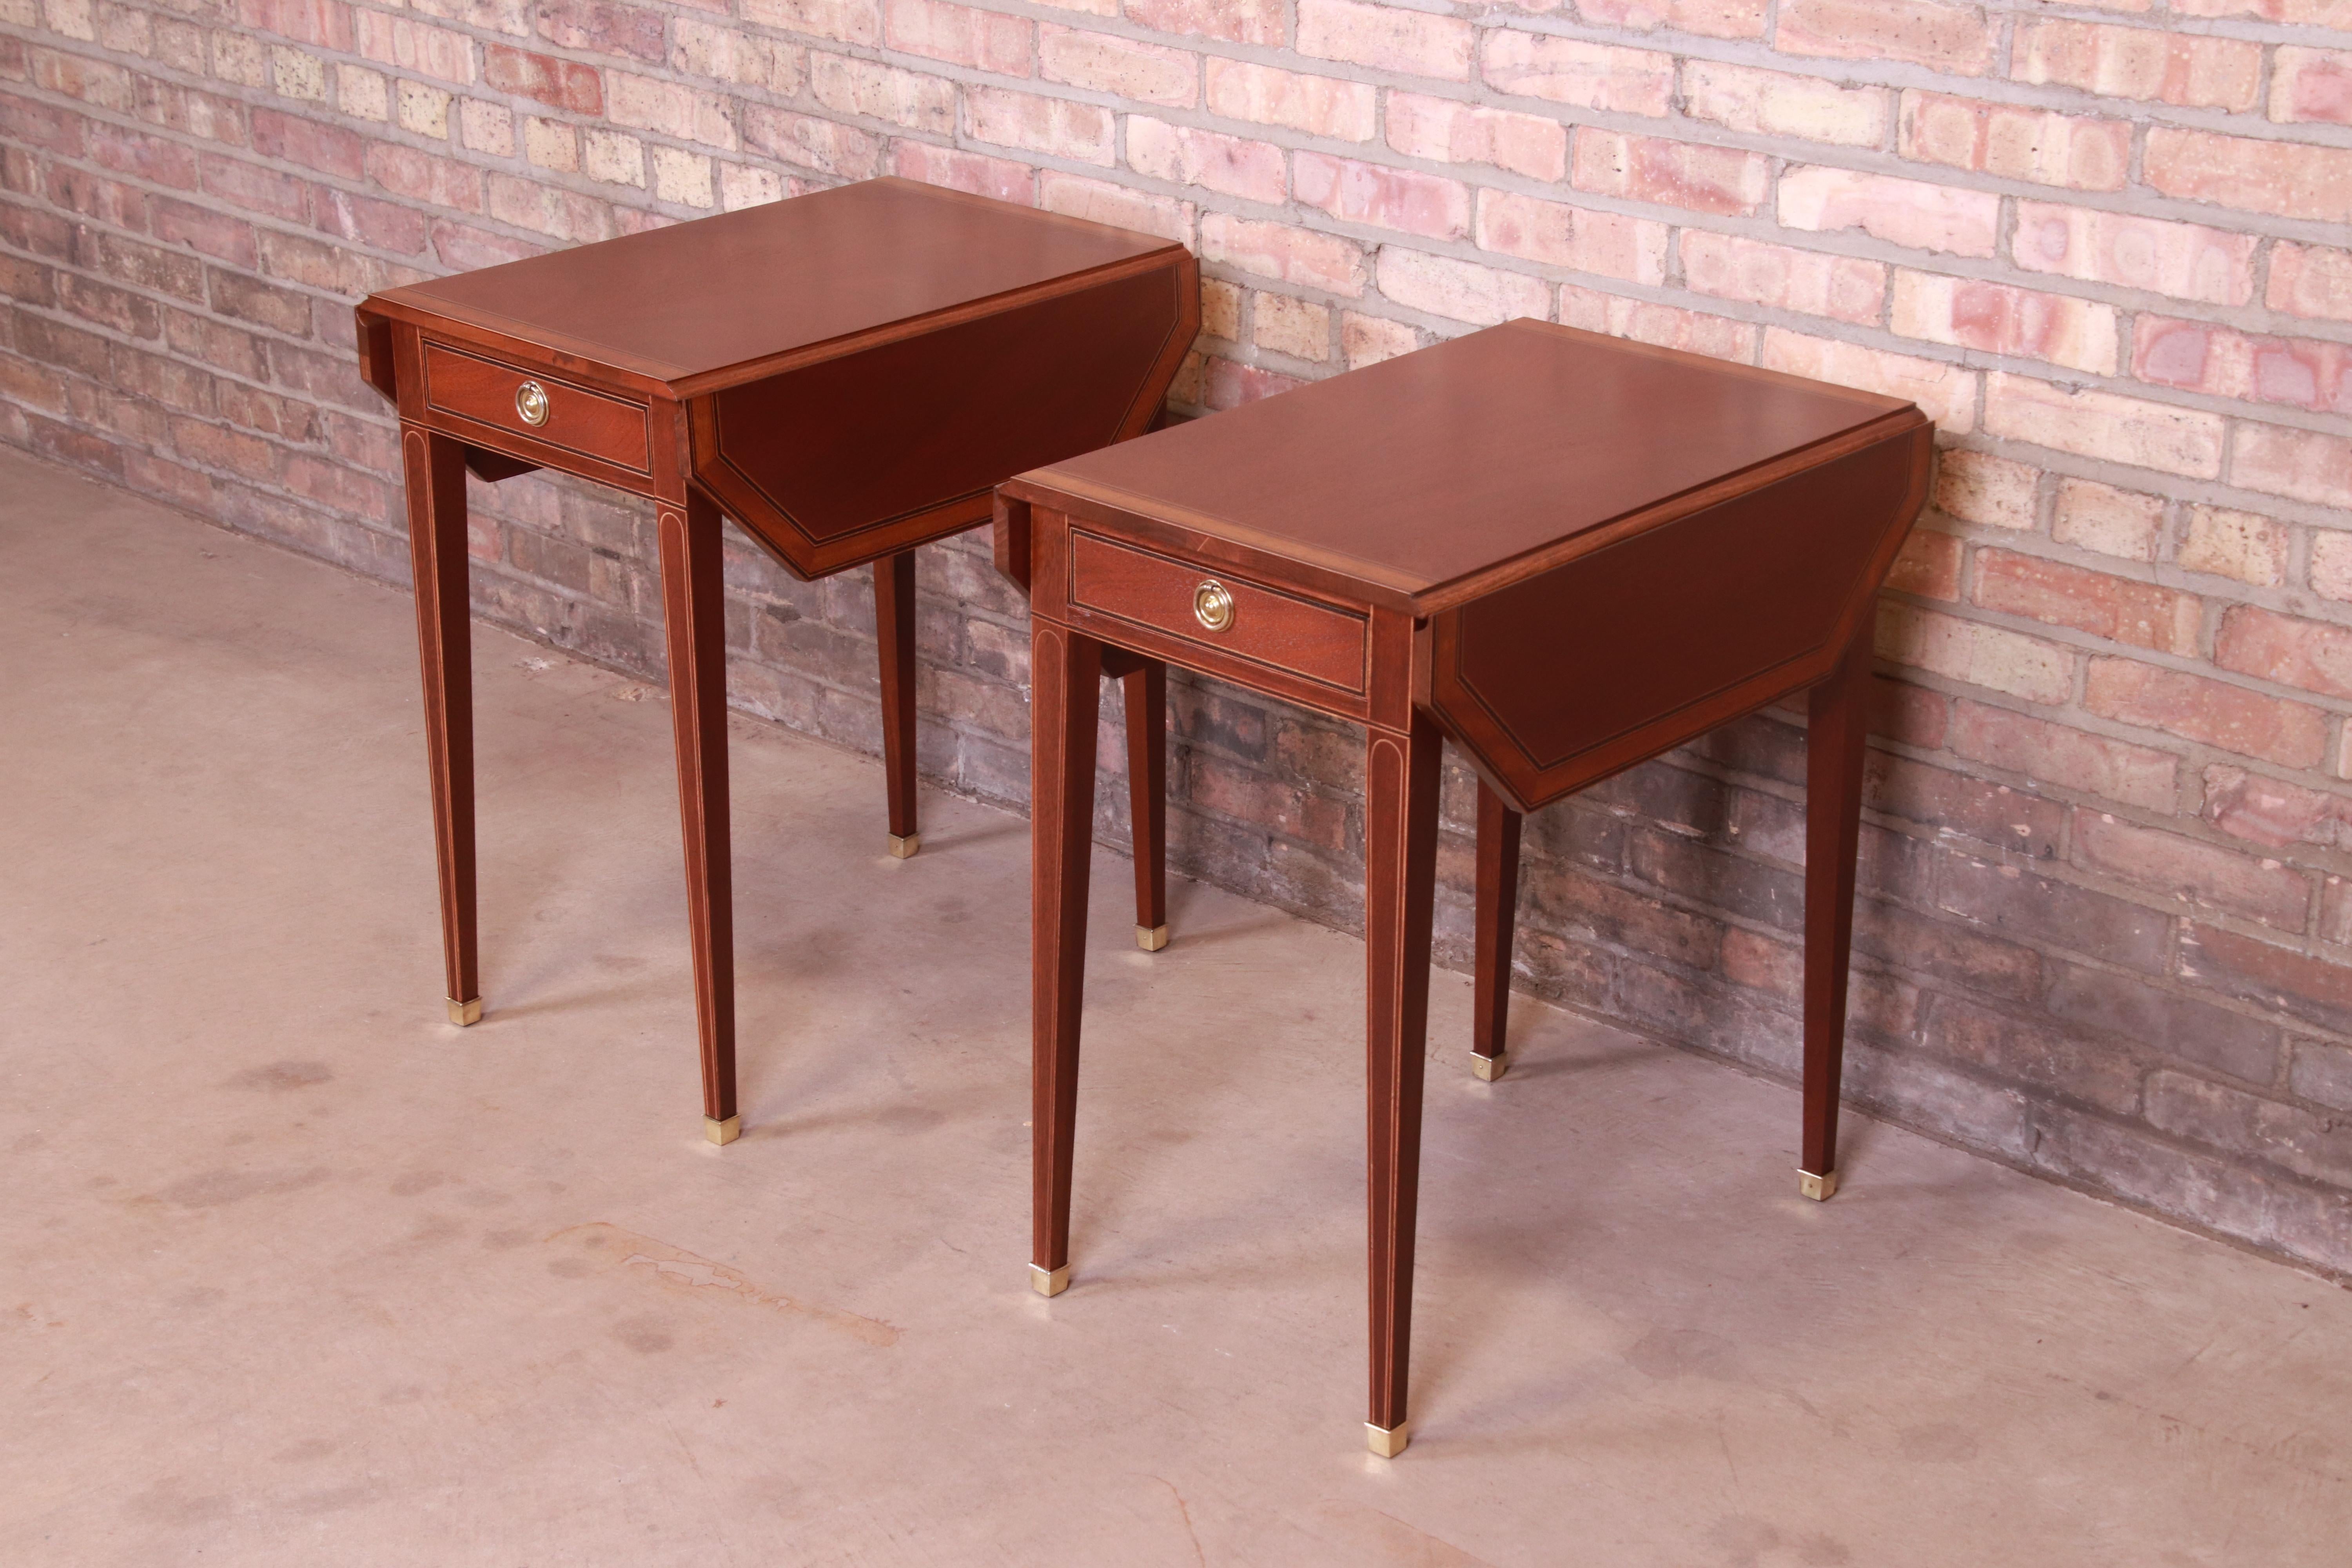 American Baker Furniture Banded Mahogany Pembroke Tea Tables, Newly Refinished